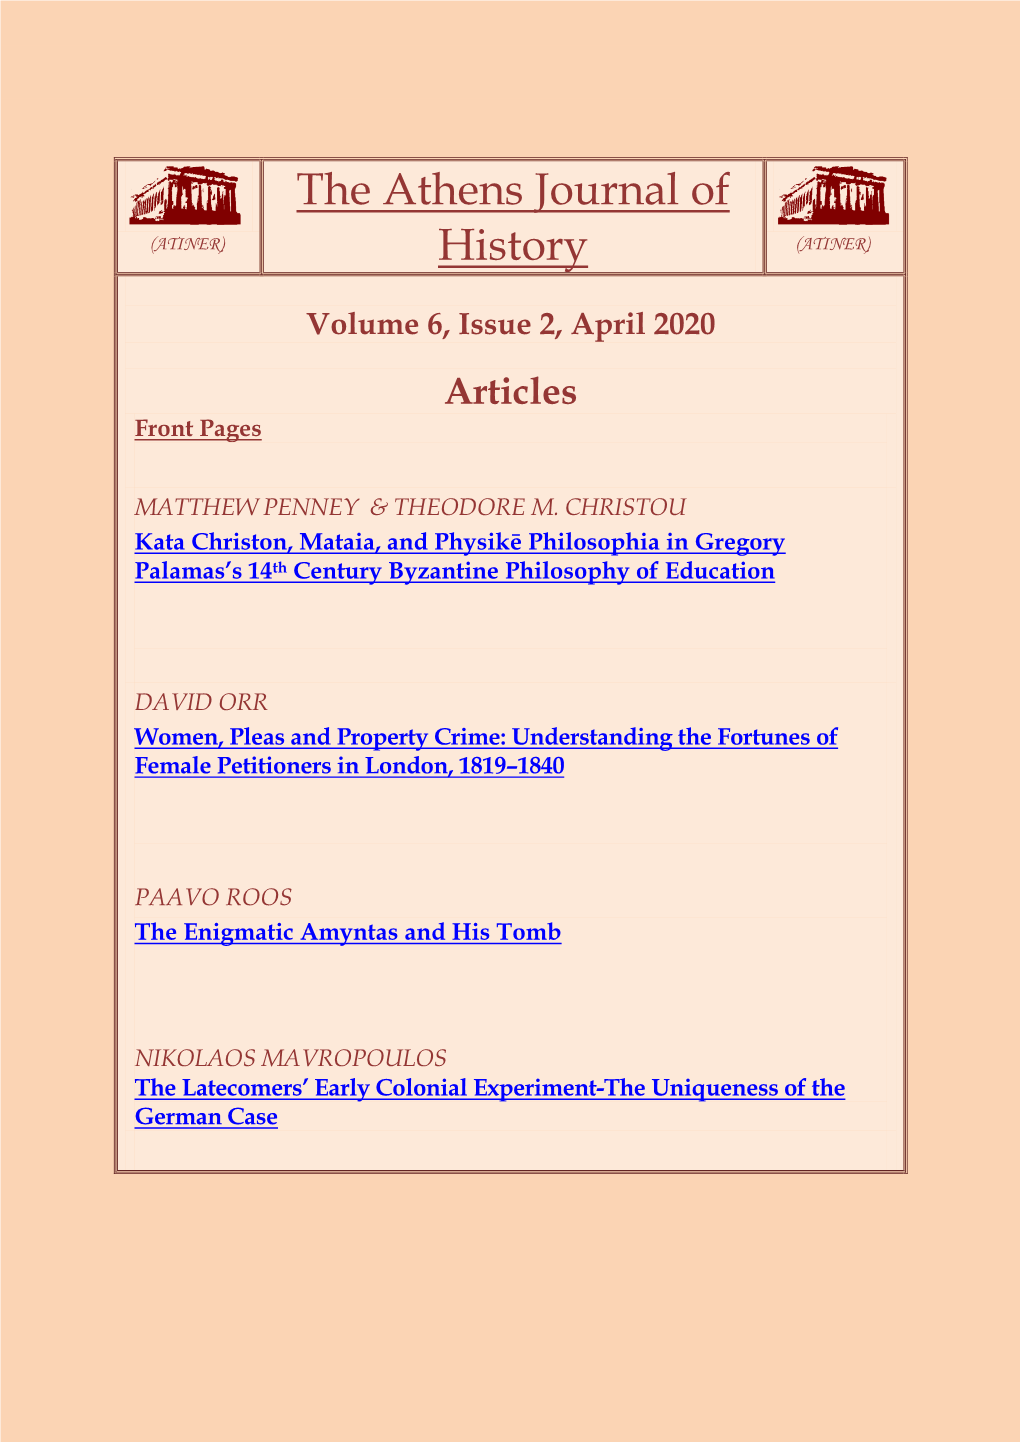 The Athens Journal of History ISSN NUMBER: 2407-9677 - DOI: 10.30958/Ajhis Volume 6, Issue 2, April 2020 Download the Entire Issue (PDF)